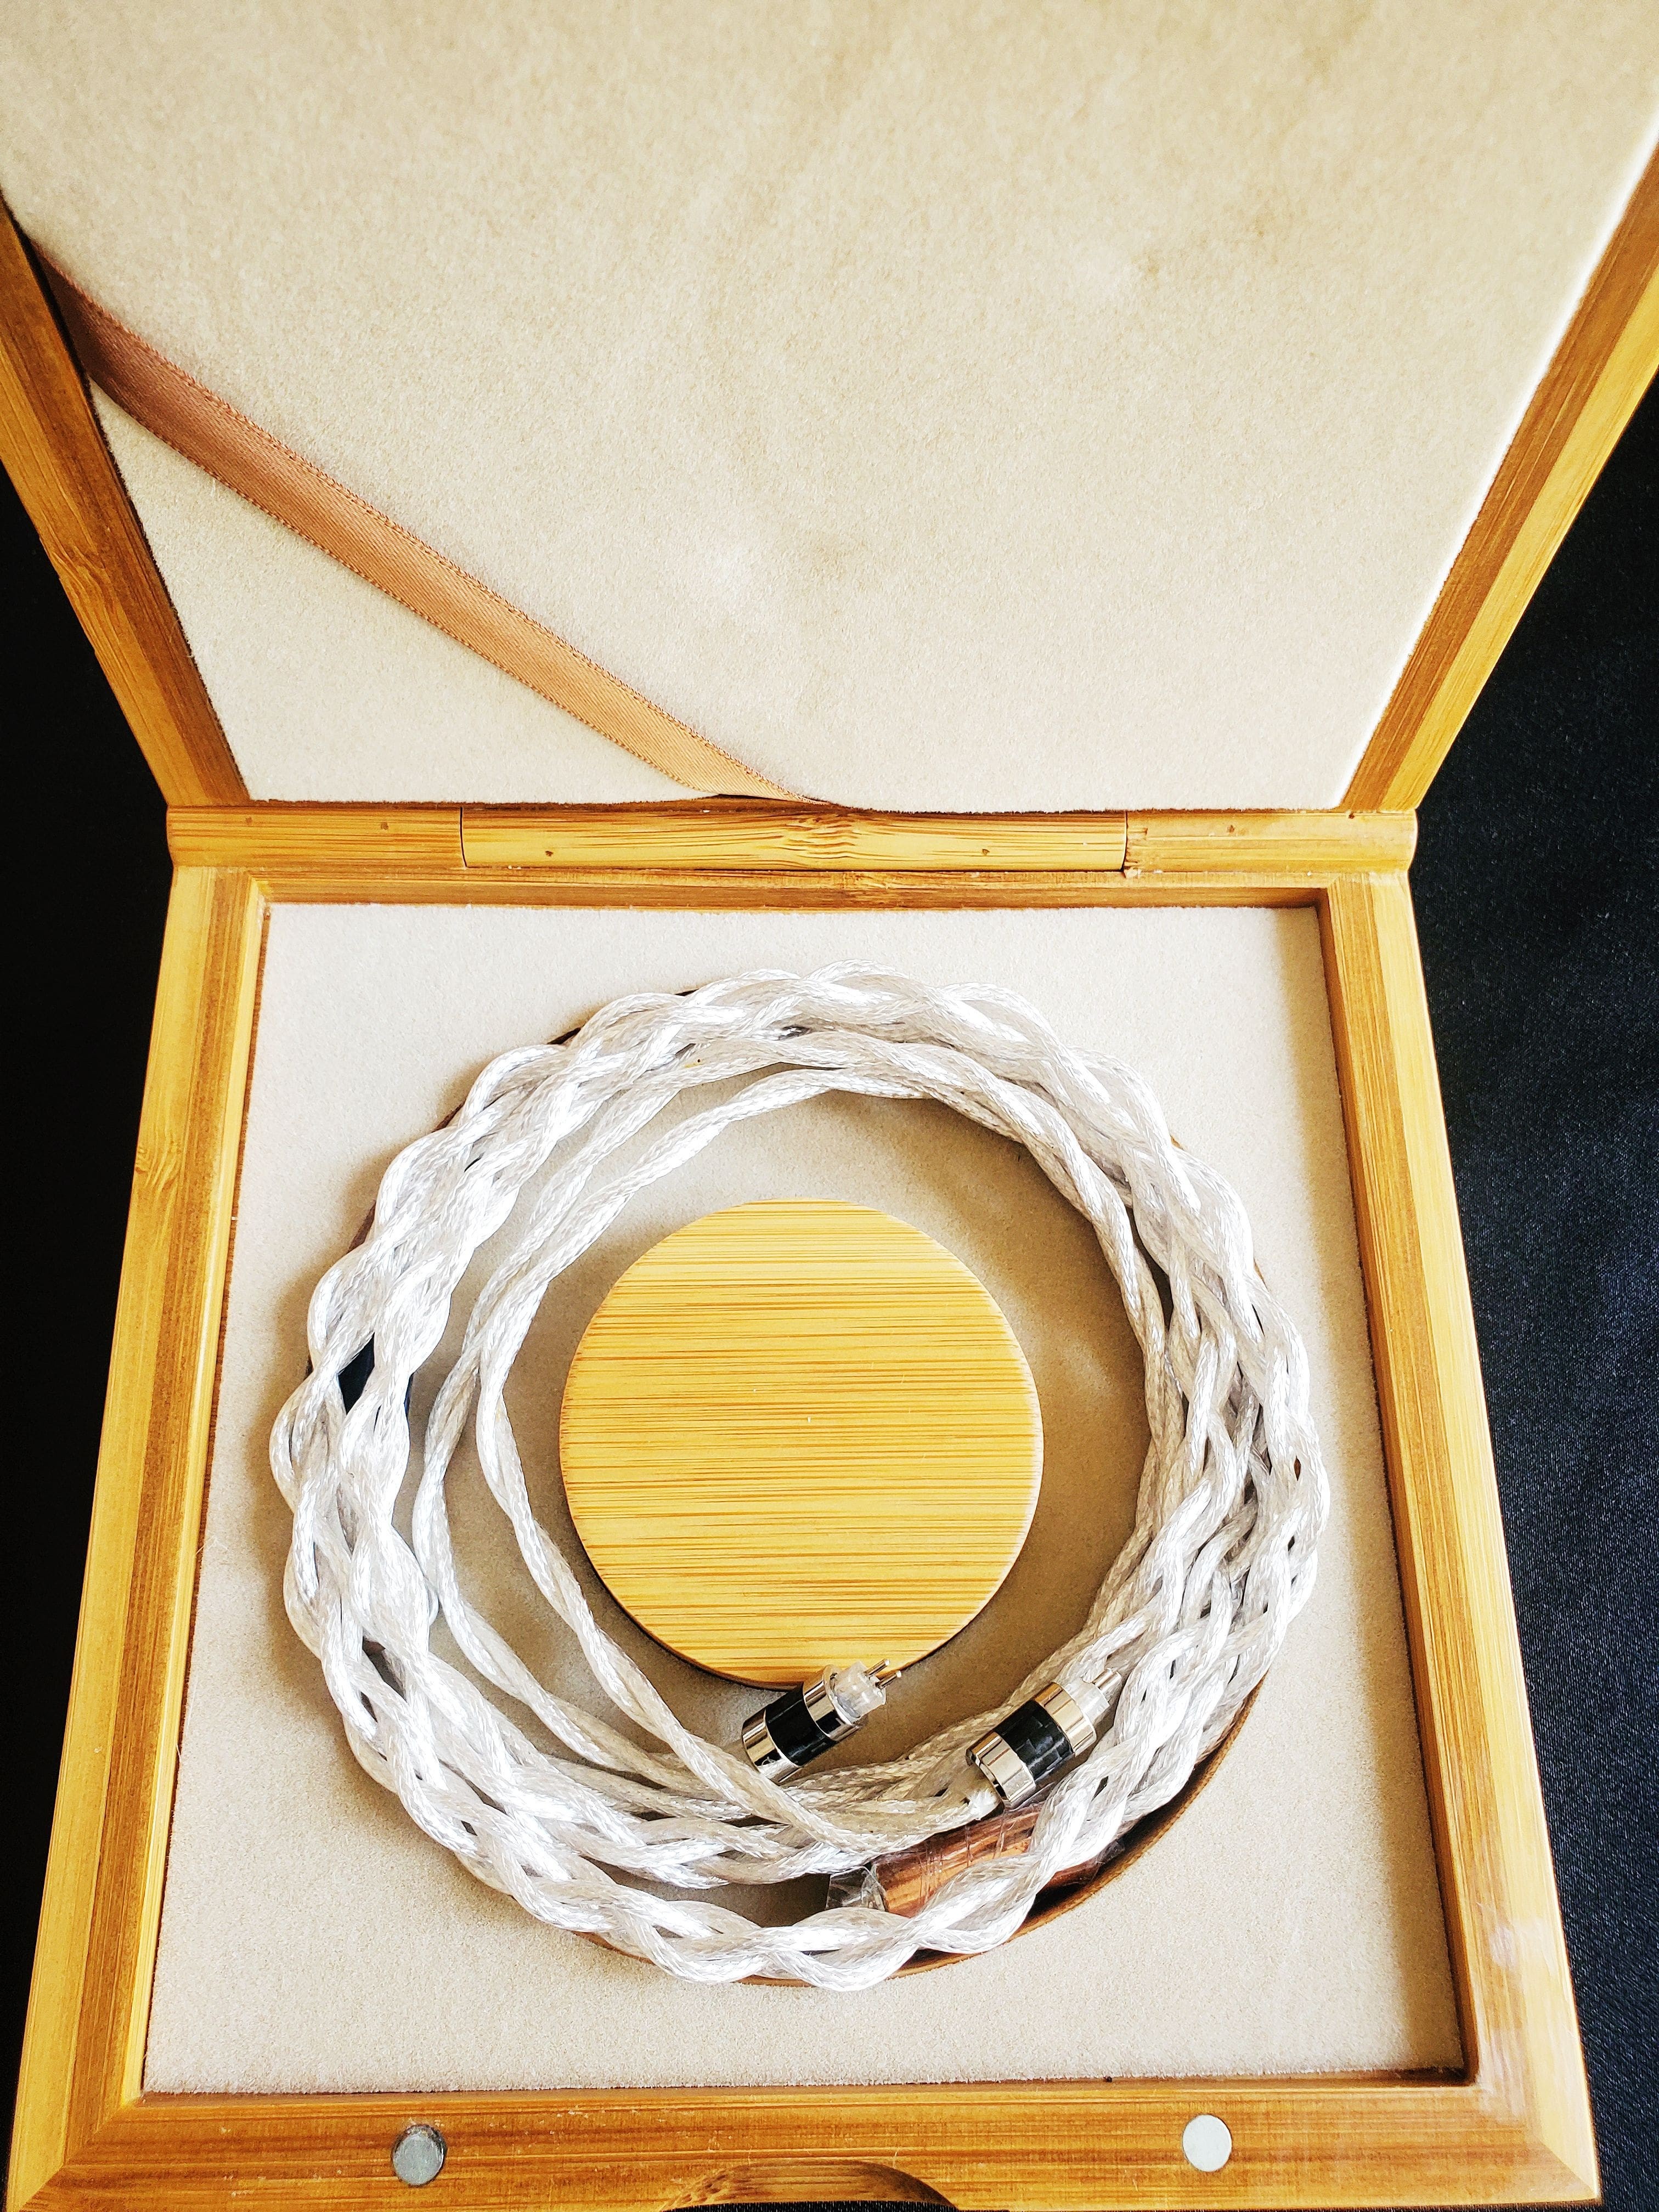 Rhapsodio - Evolution Siver - 4 wires - Full silver Flagship Cable